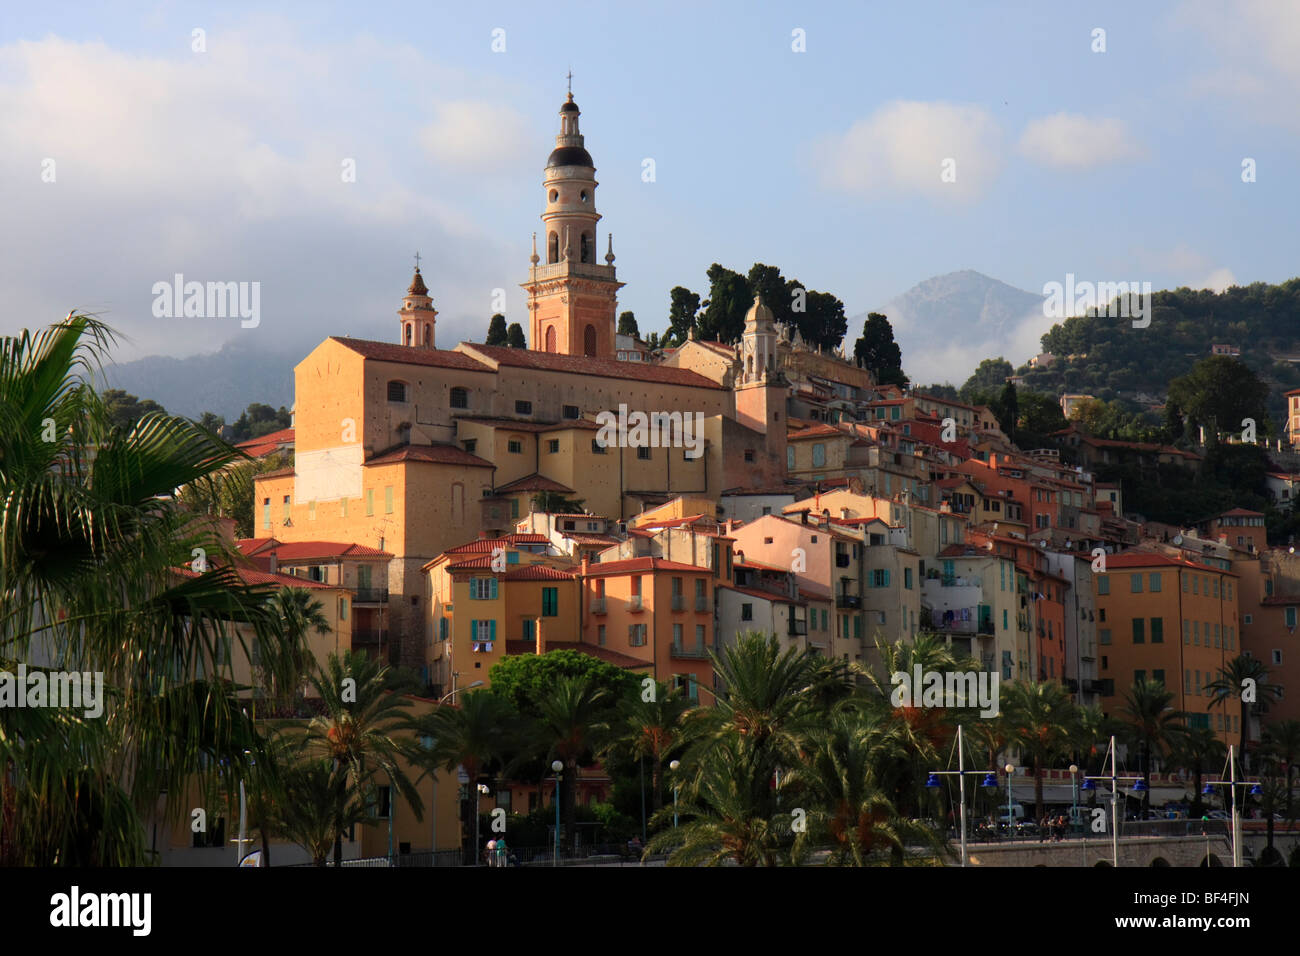 Old town of Menton with the St. Michel church, Cote d'Azur, Region Provence Alpes Cote d'Azur, Alpes Maritimes, France, Europe Stock Photo